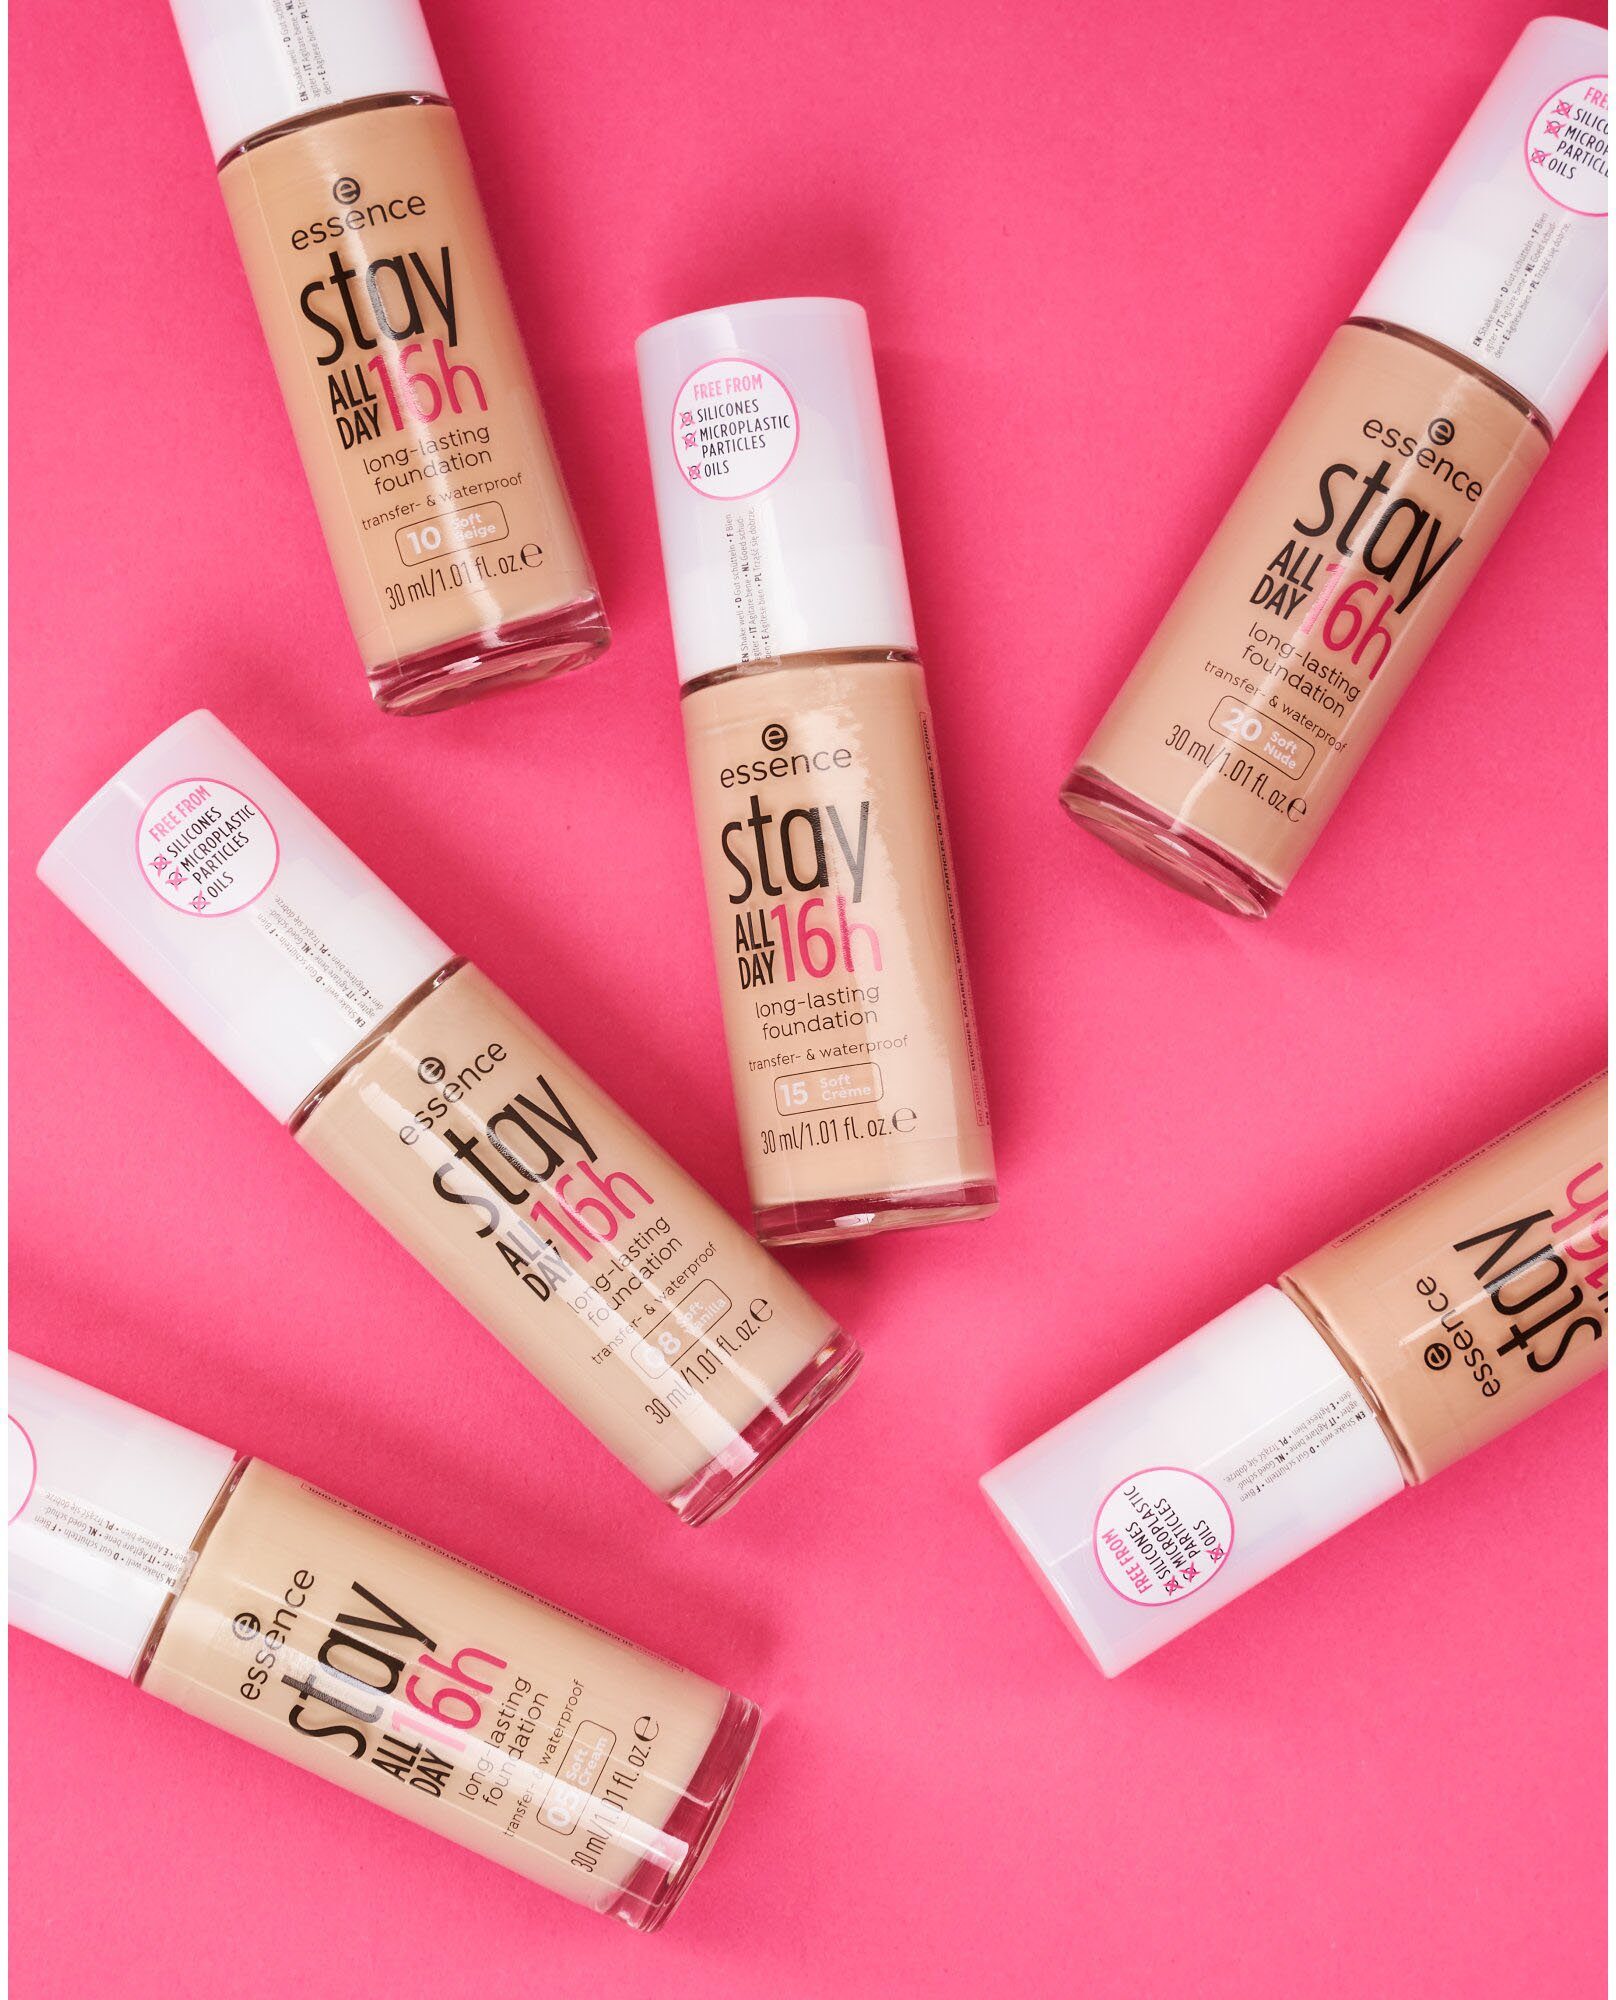 Foundation Essence 3-tlg. Creme long-lasting, Soft DAY stay ALL 16h